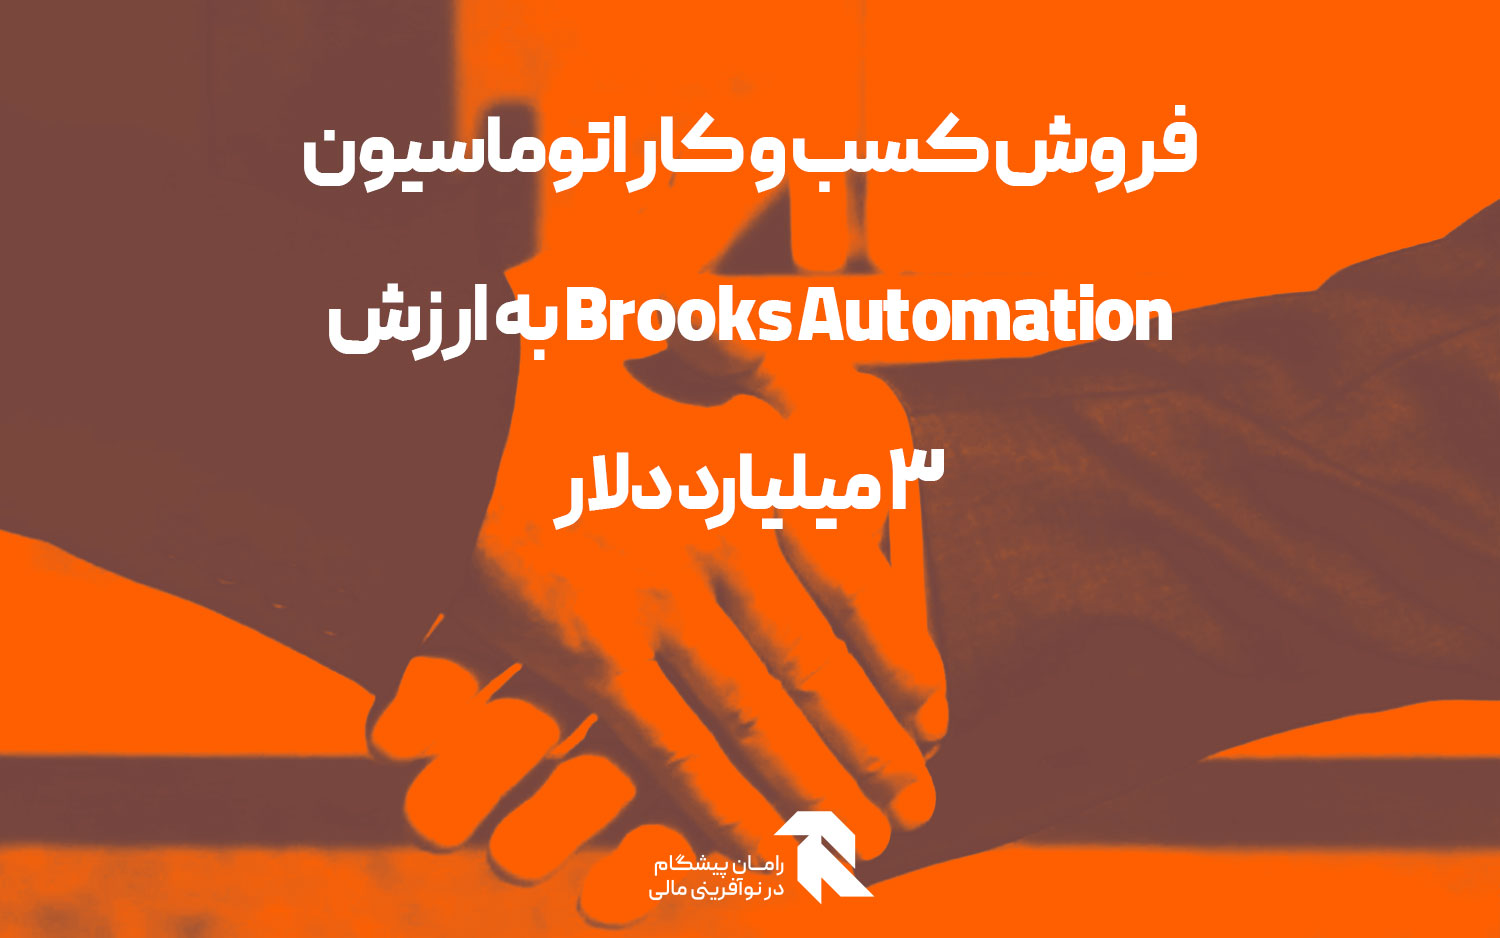 Brooks Automation to sell automation unit for $3 bln, scraps separation plans